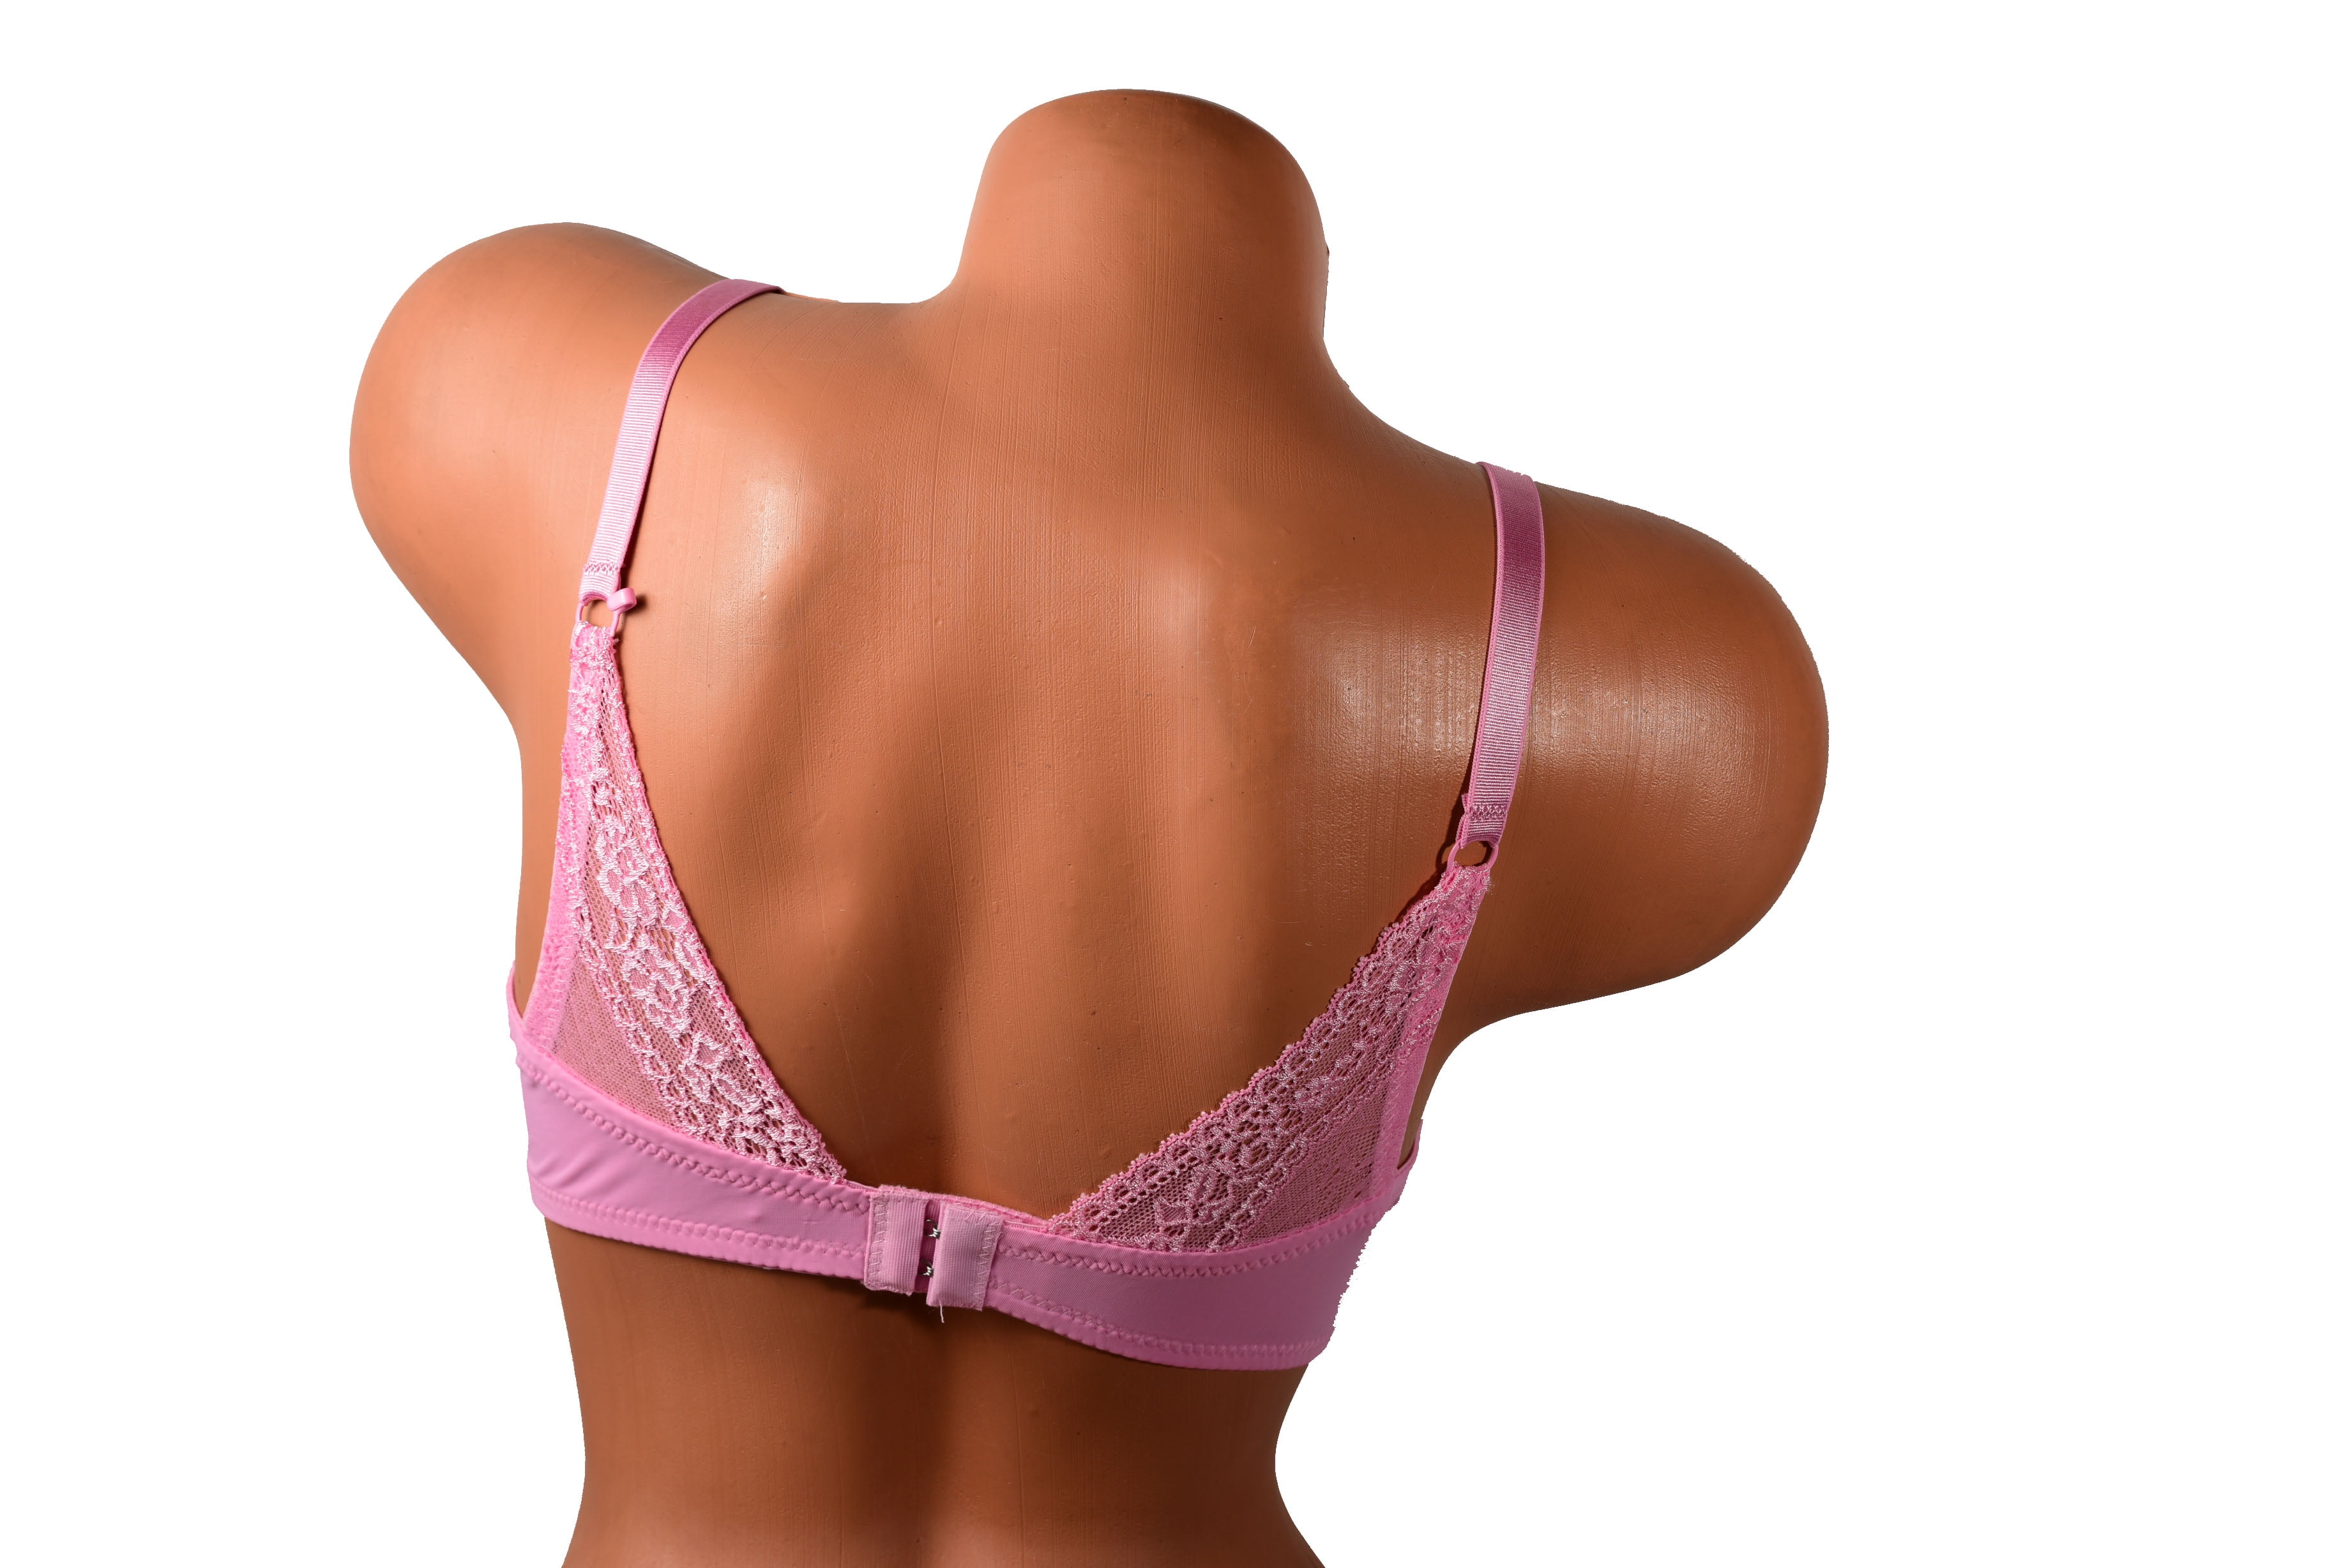 Women Bras 6 Pack of BraB cup C cup Size 34C (6676)